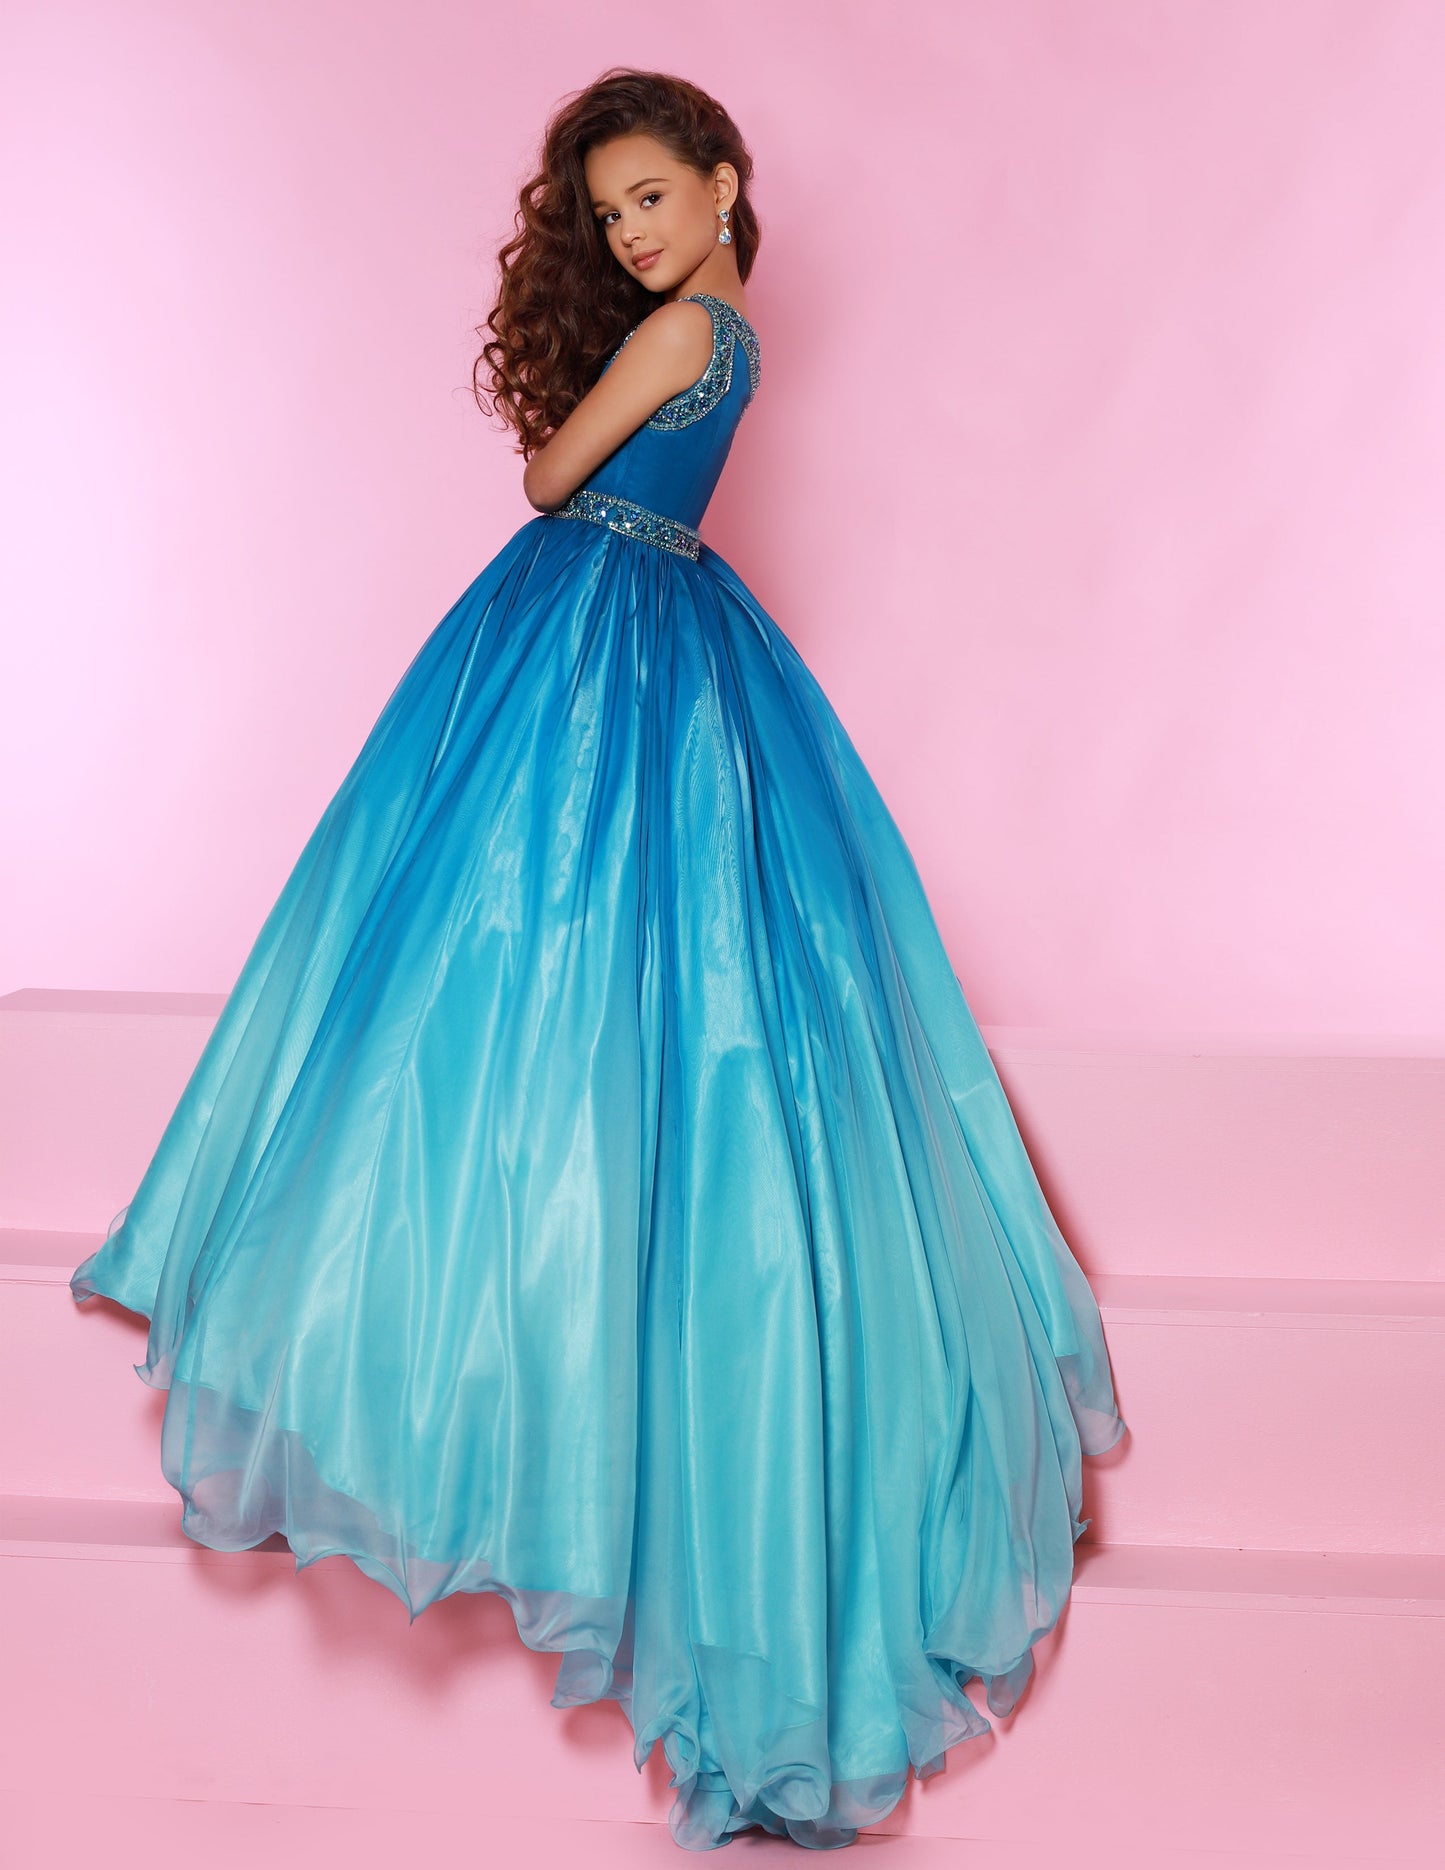 Sugar Kayne C169 is a long Ombre Girls Pageant Dress. Featuring an embellished one shoulder design. Colors: Cherry/Ombre, Blueberry/Ombre  Sizes:  2-16  (Sizes 2-6 do not have bust cups, Sizes 8-16 will have preteen size bust cups)